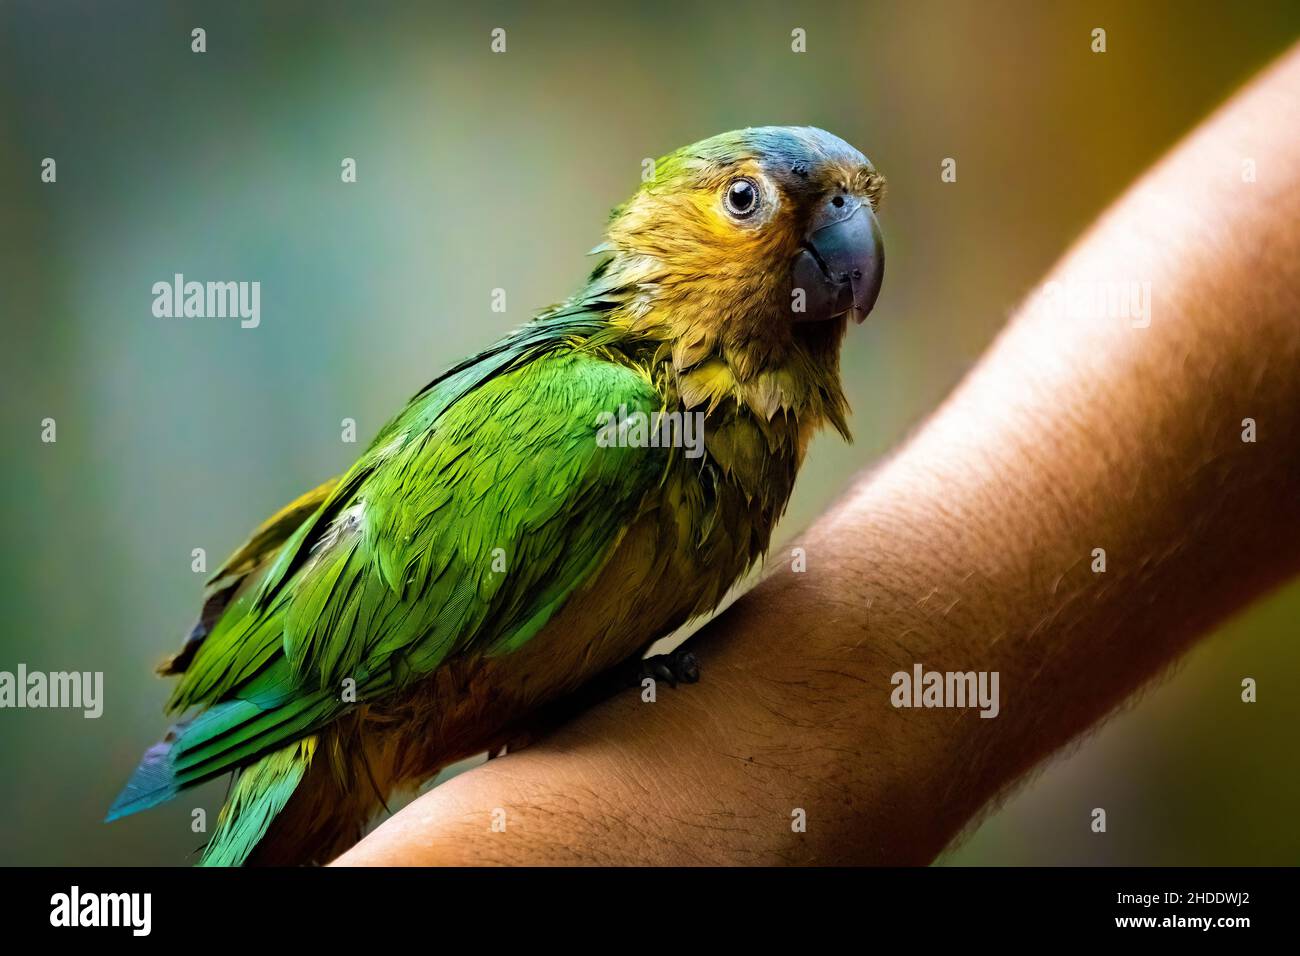 Cute green wet parrot sitting on hand close up portrait Stock Photo